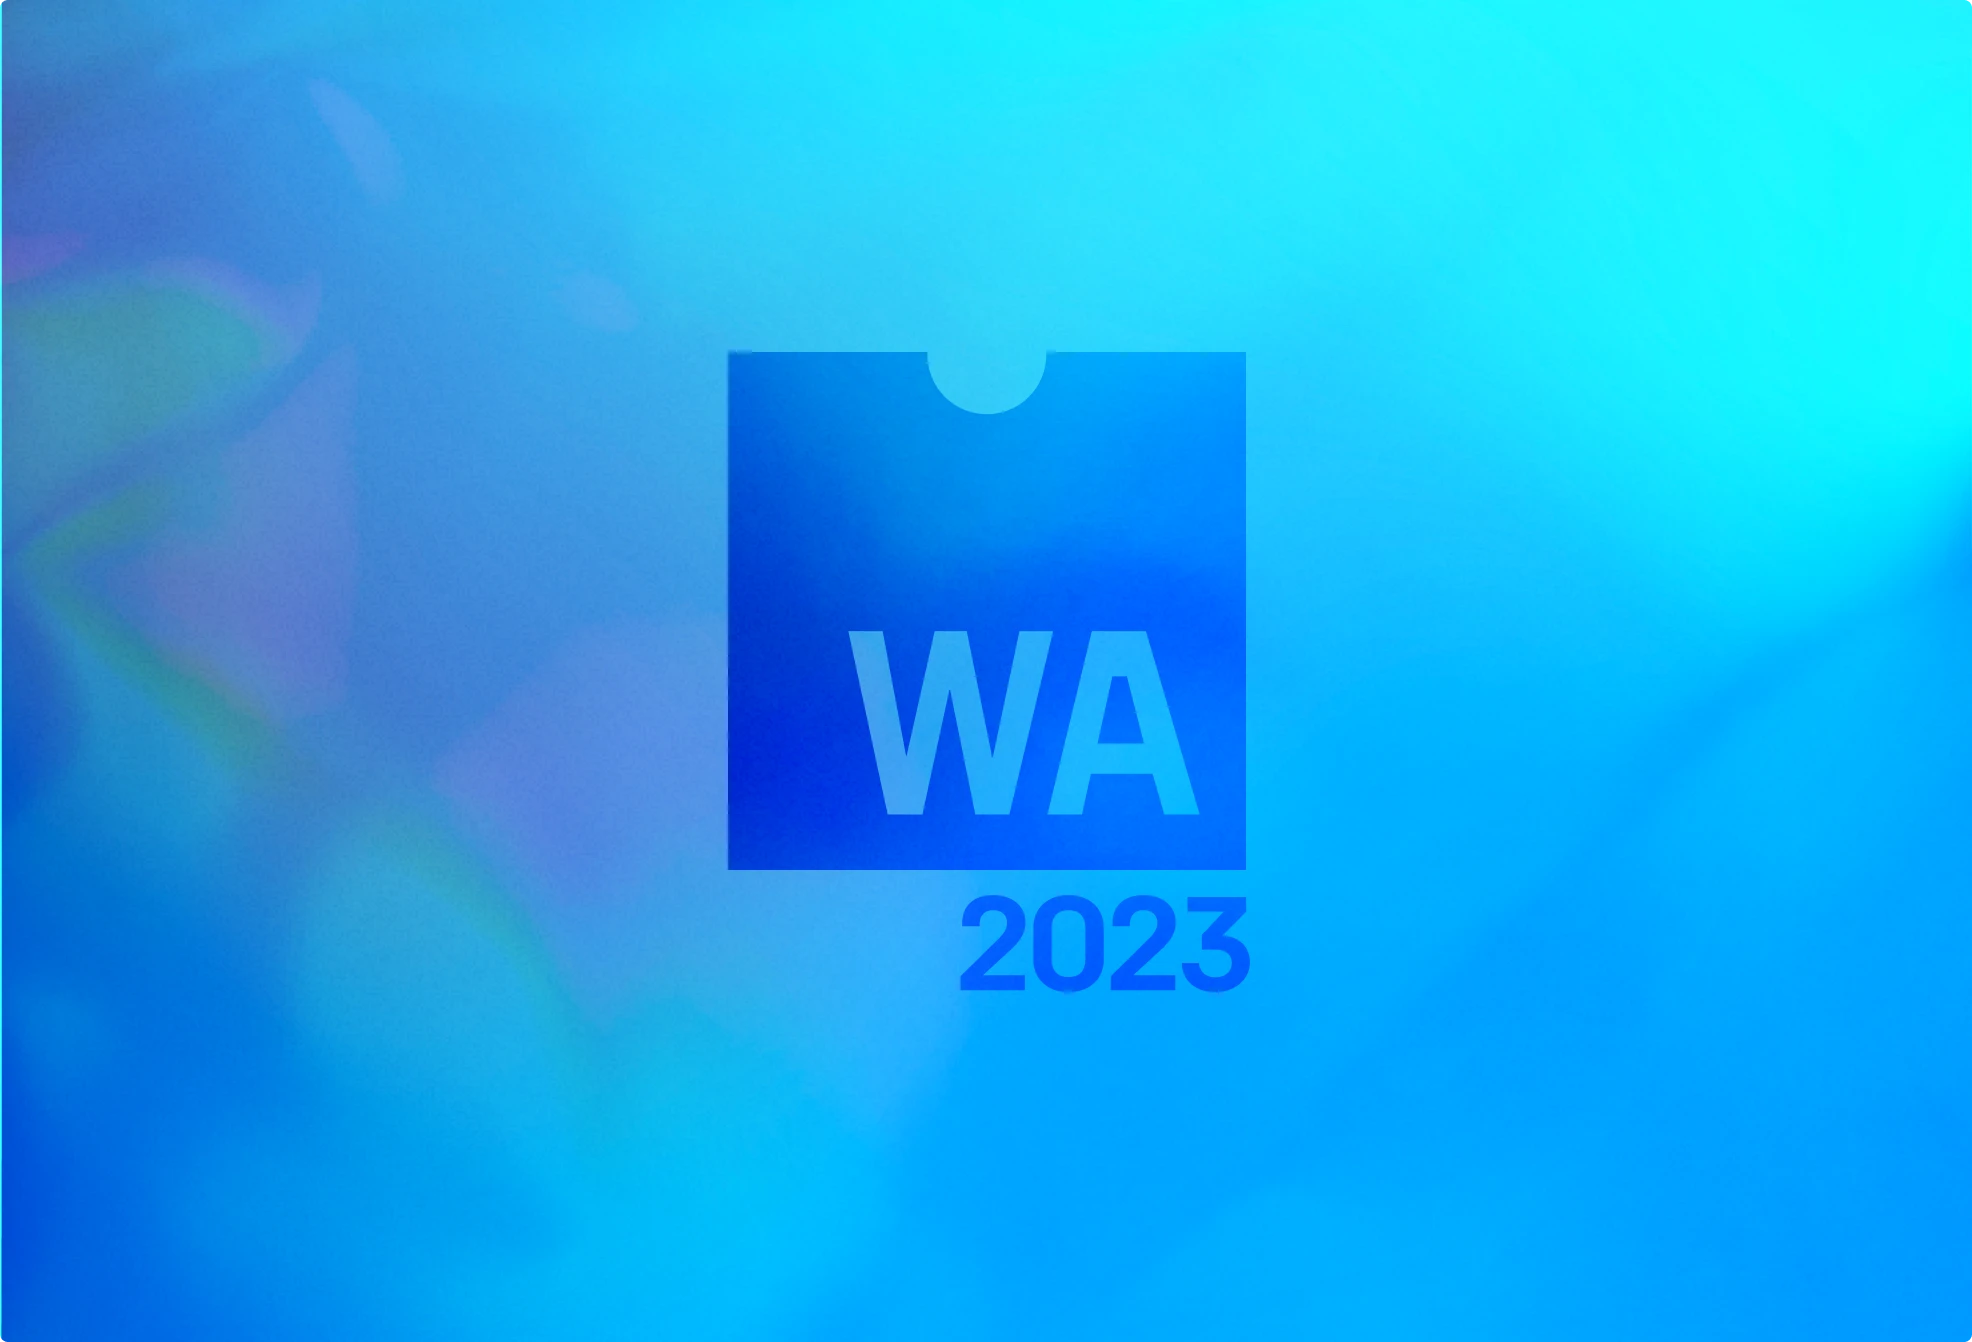 WebAssembly’s second-order impact on AI